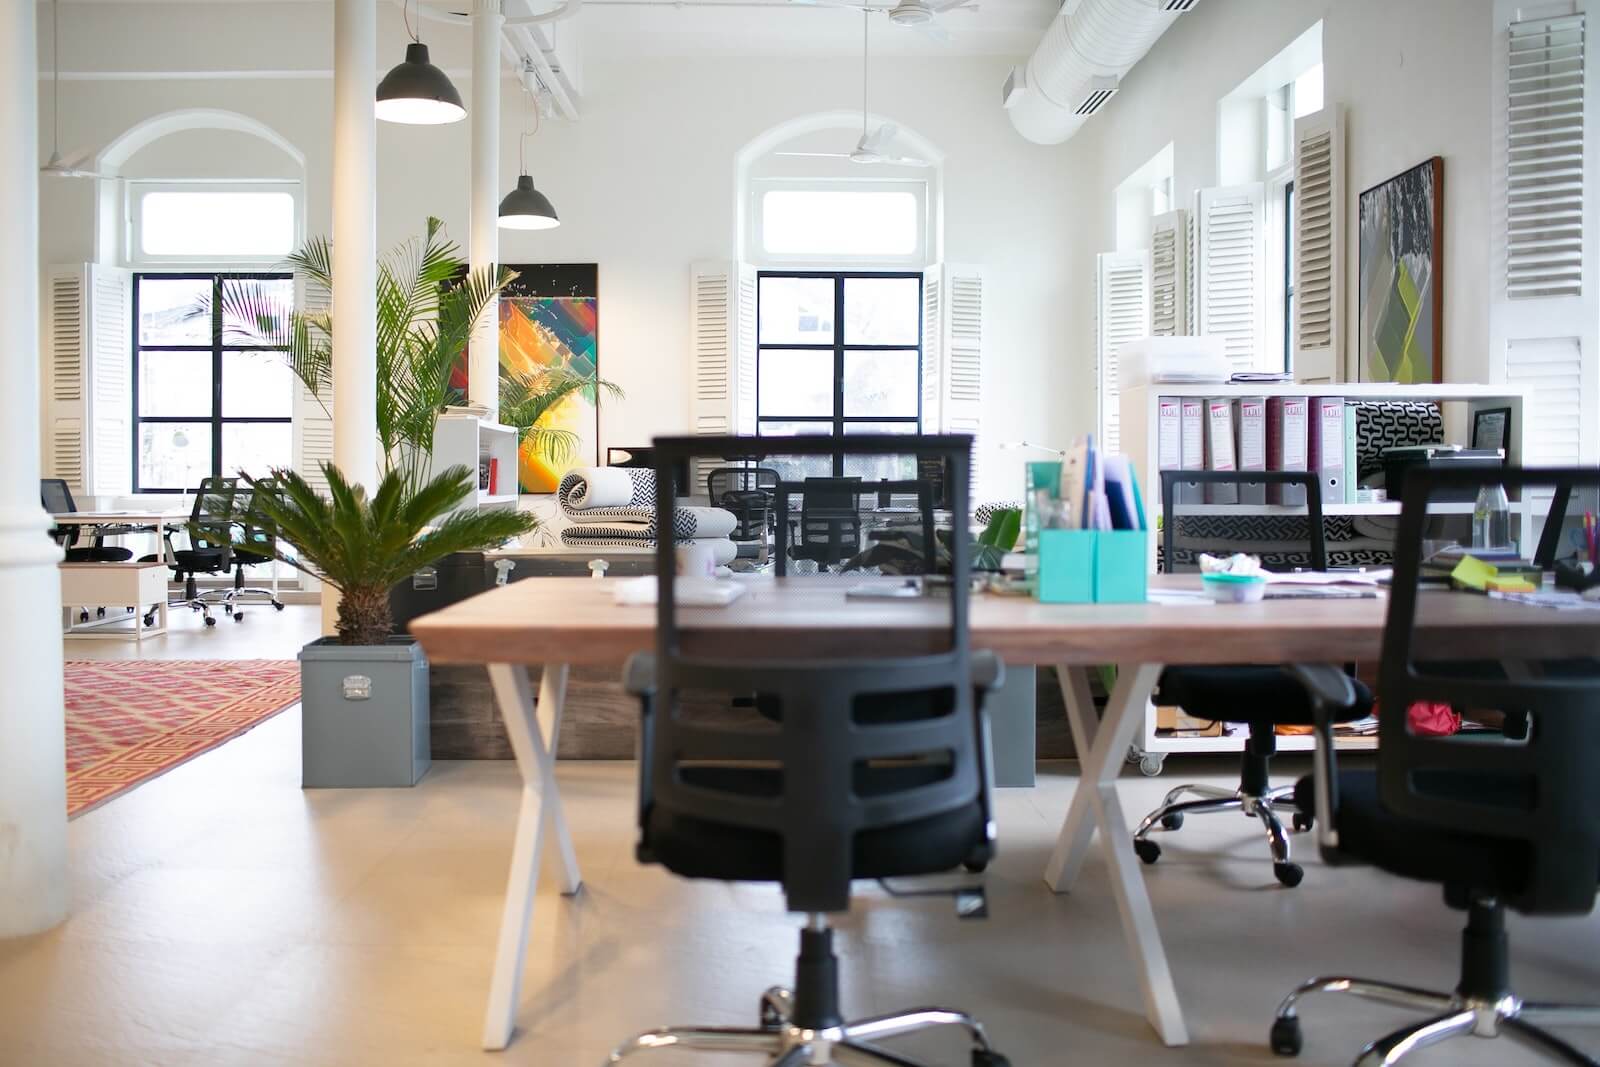 The benefits of natural light in the workplace